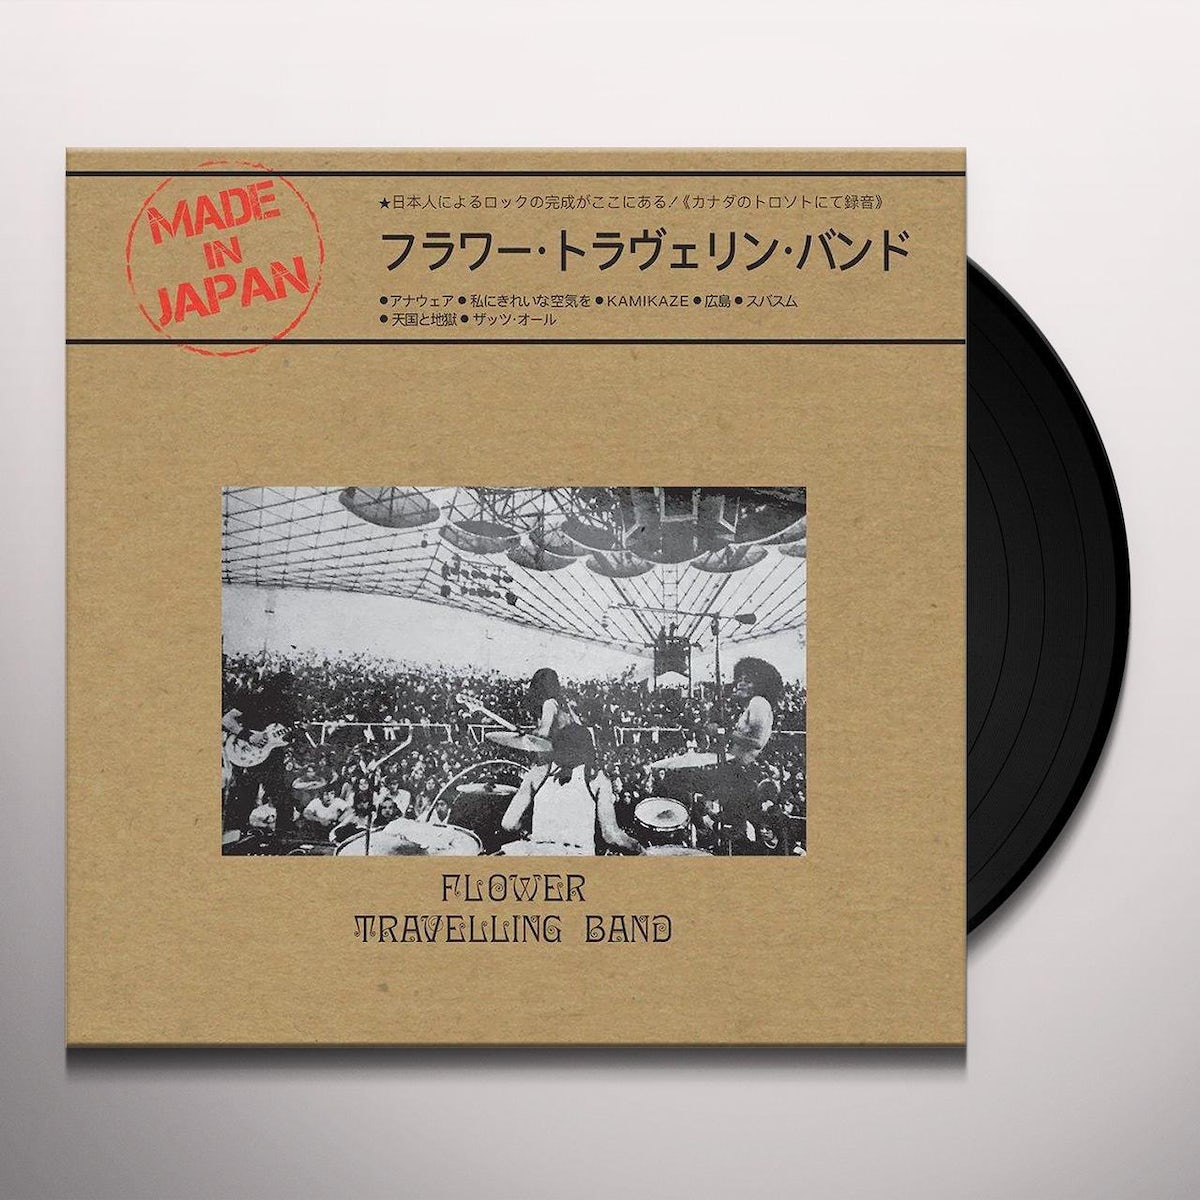 Flower Travellin' Band - Made In Japan LP (Life Goes On Reissue)